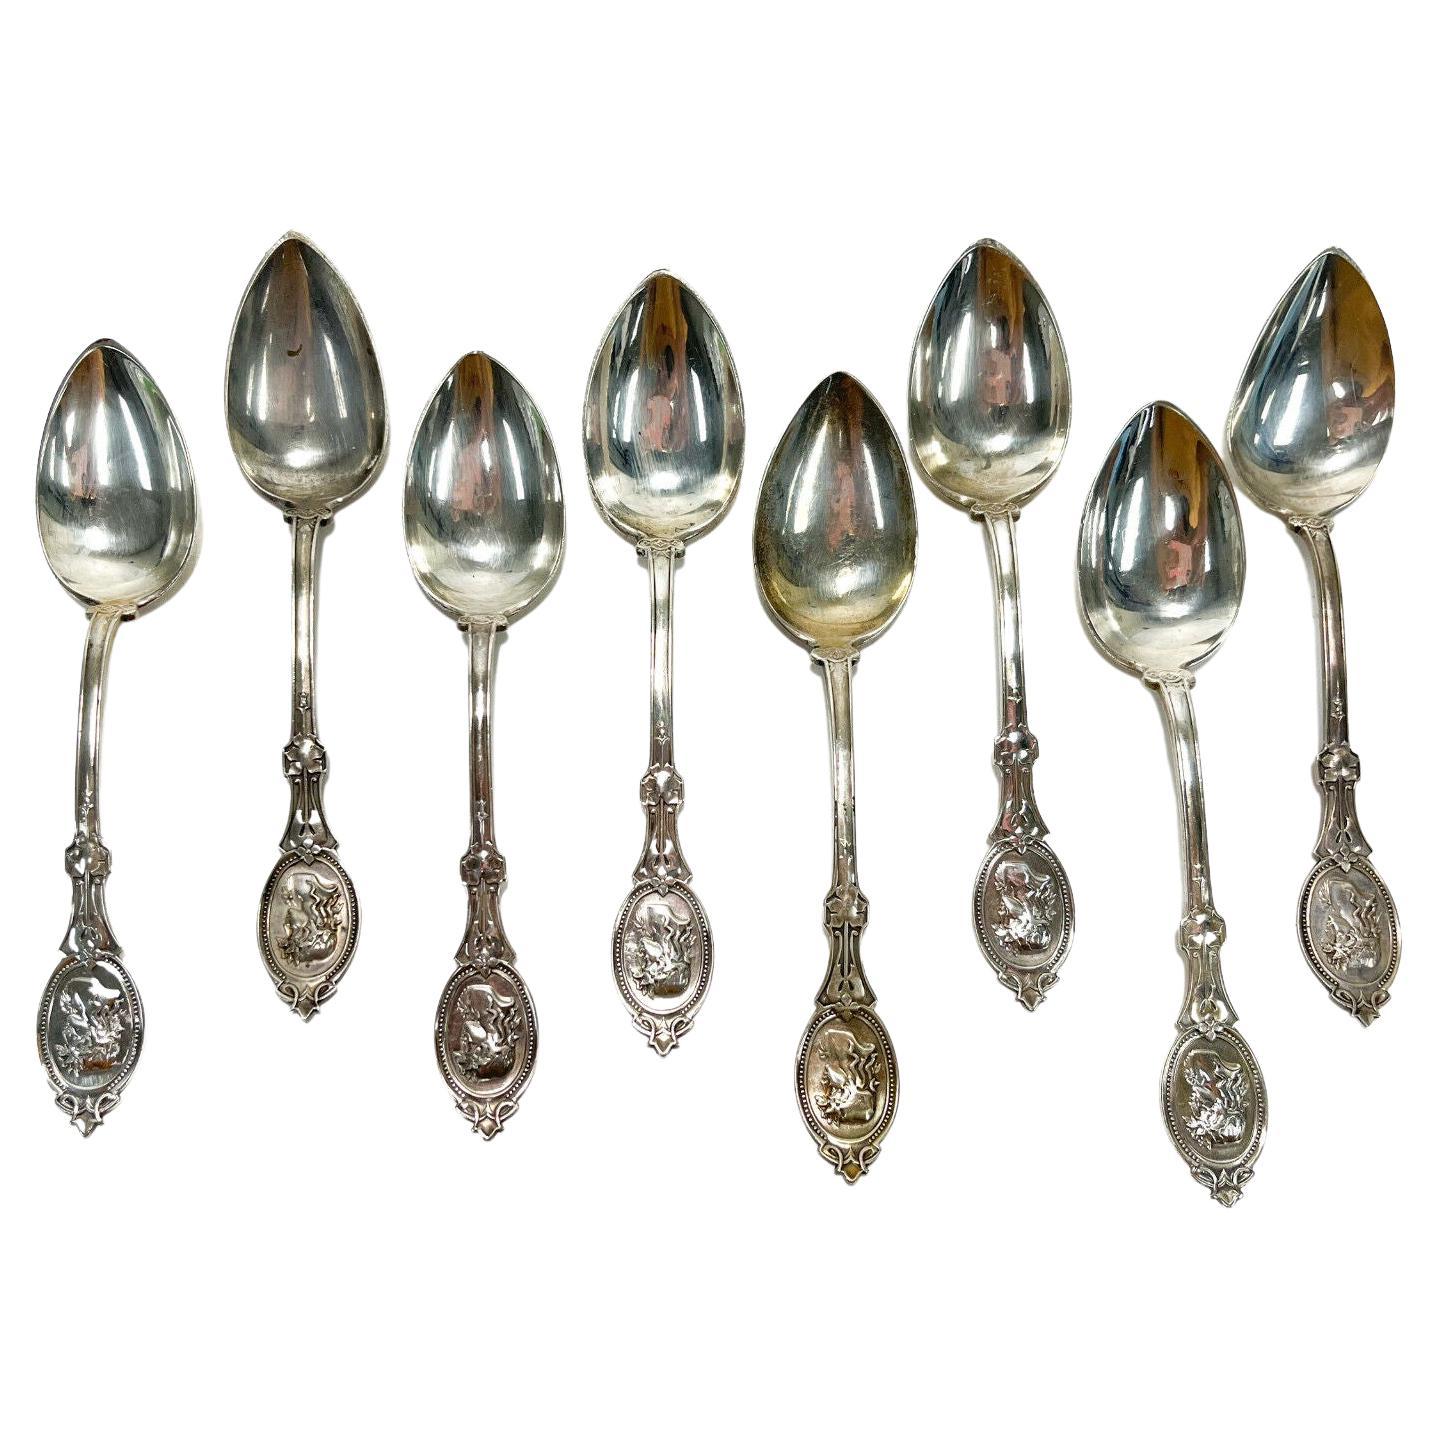 8 Hotchkiss & Schreuder Sterling Silver Medallion Grapefruit Spoons, Late 19th C For Sale